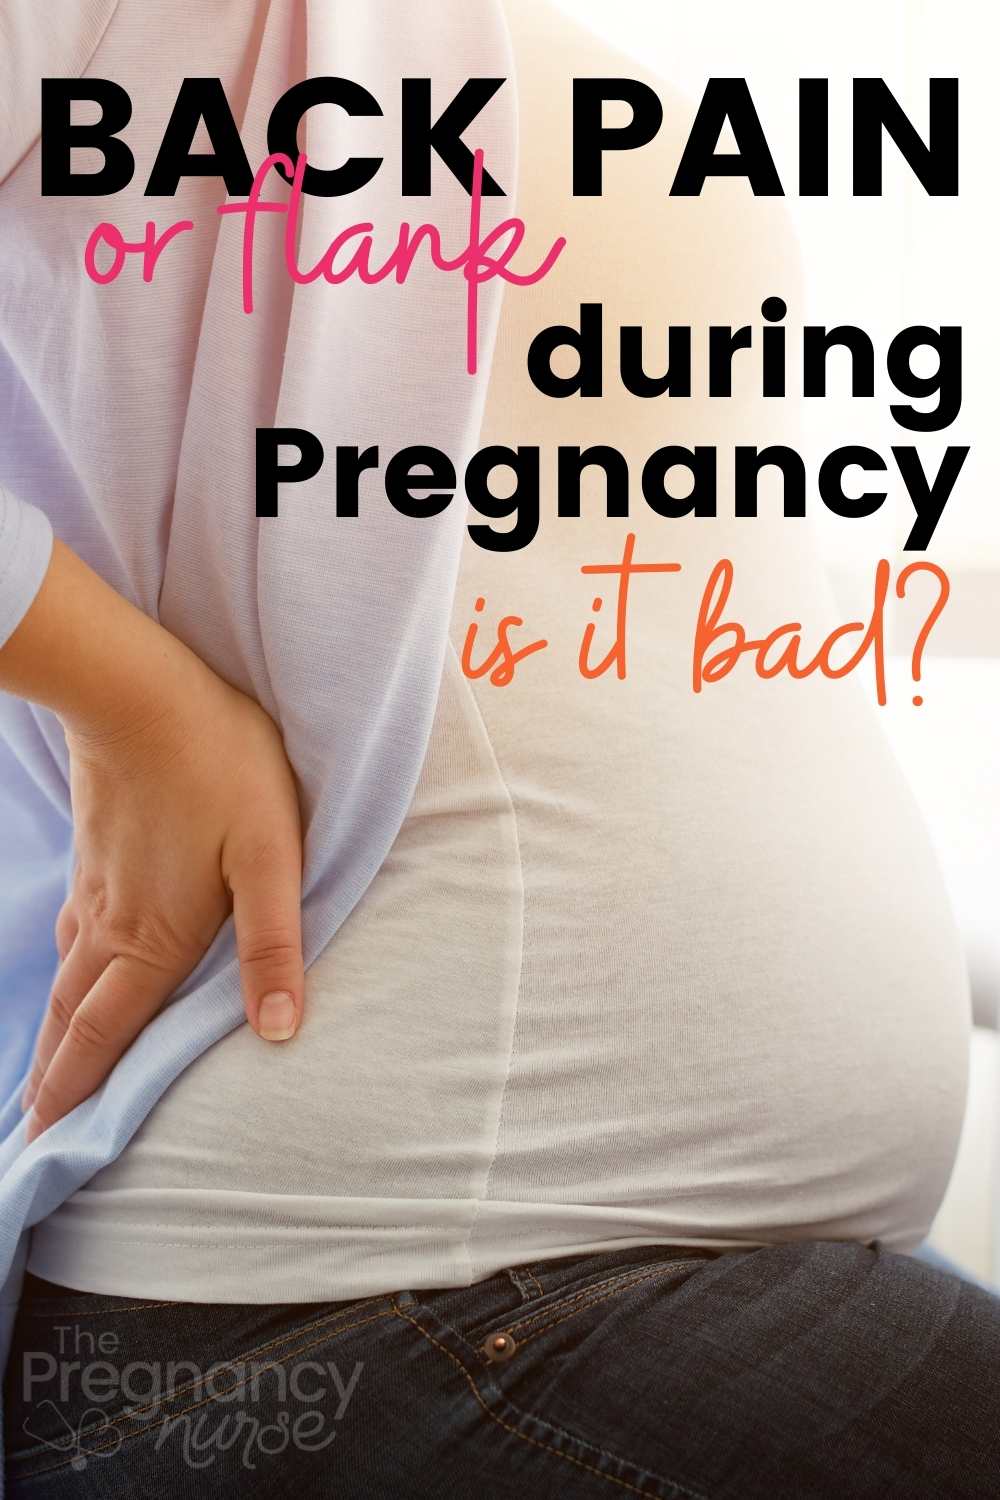 Minor aches and pains are normal during pregnancy, but if you're experiencing flank pain, it's important to get checked out by a doctor. Here are some of the things that could be causing your flank pain, and what you can do about it.